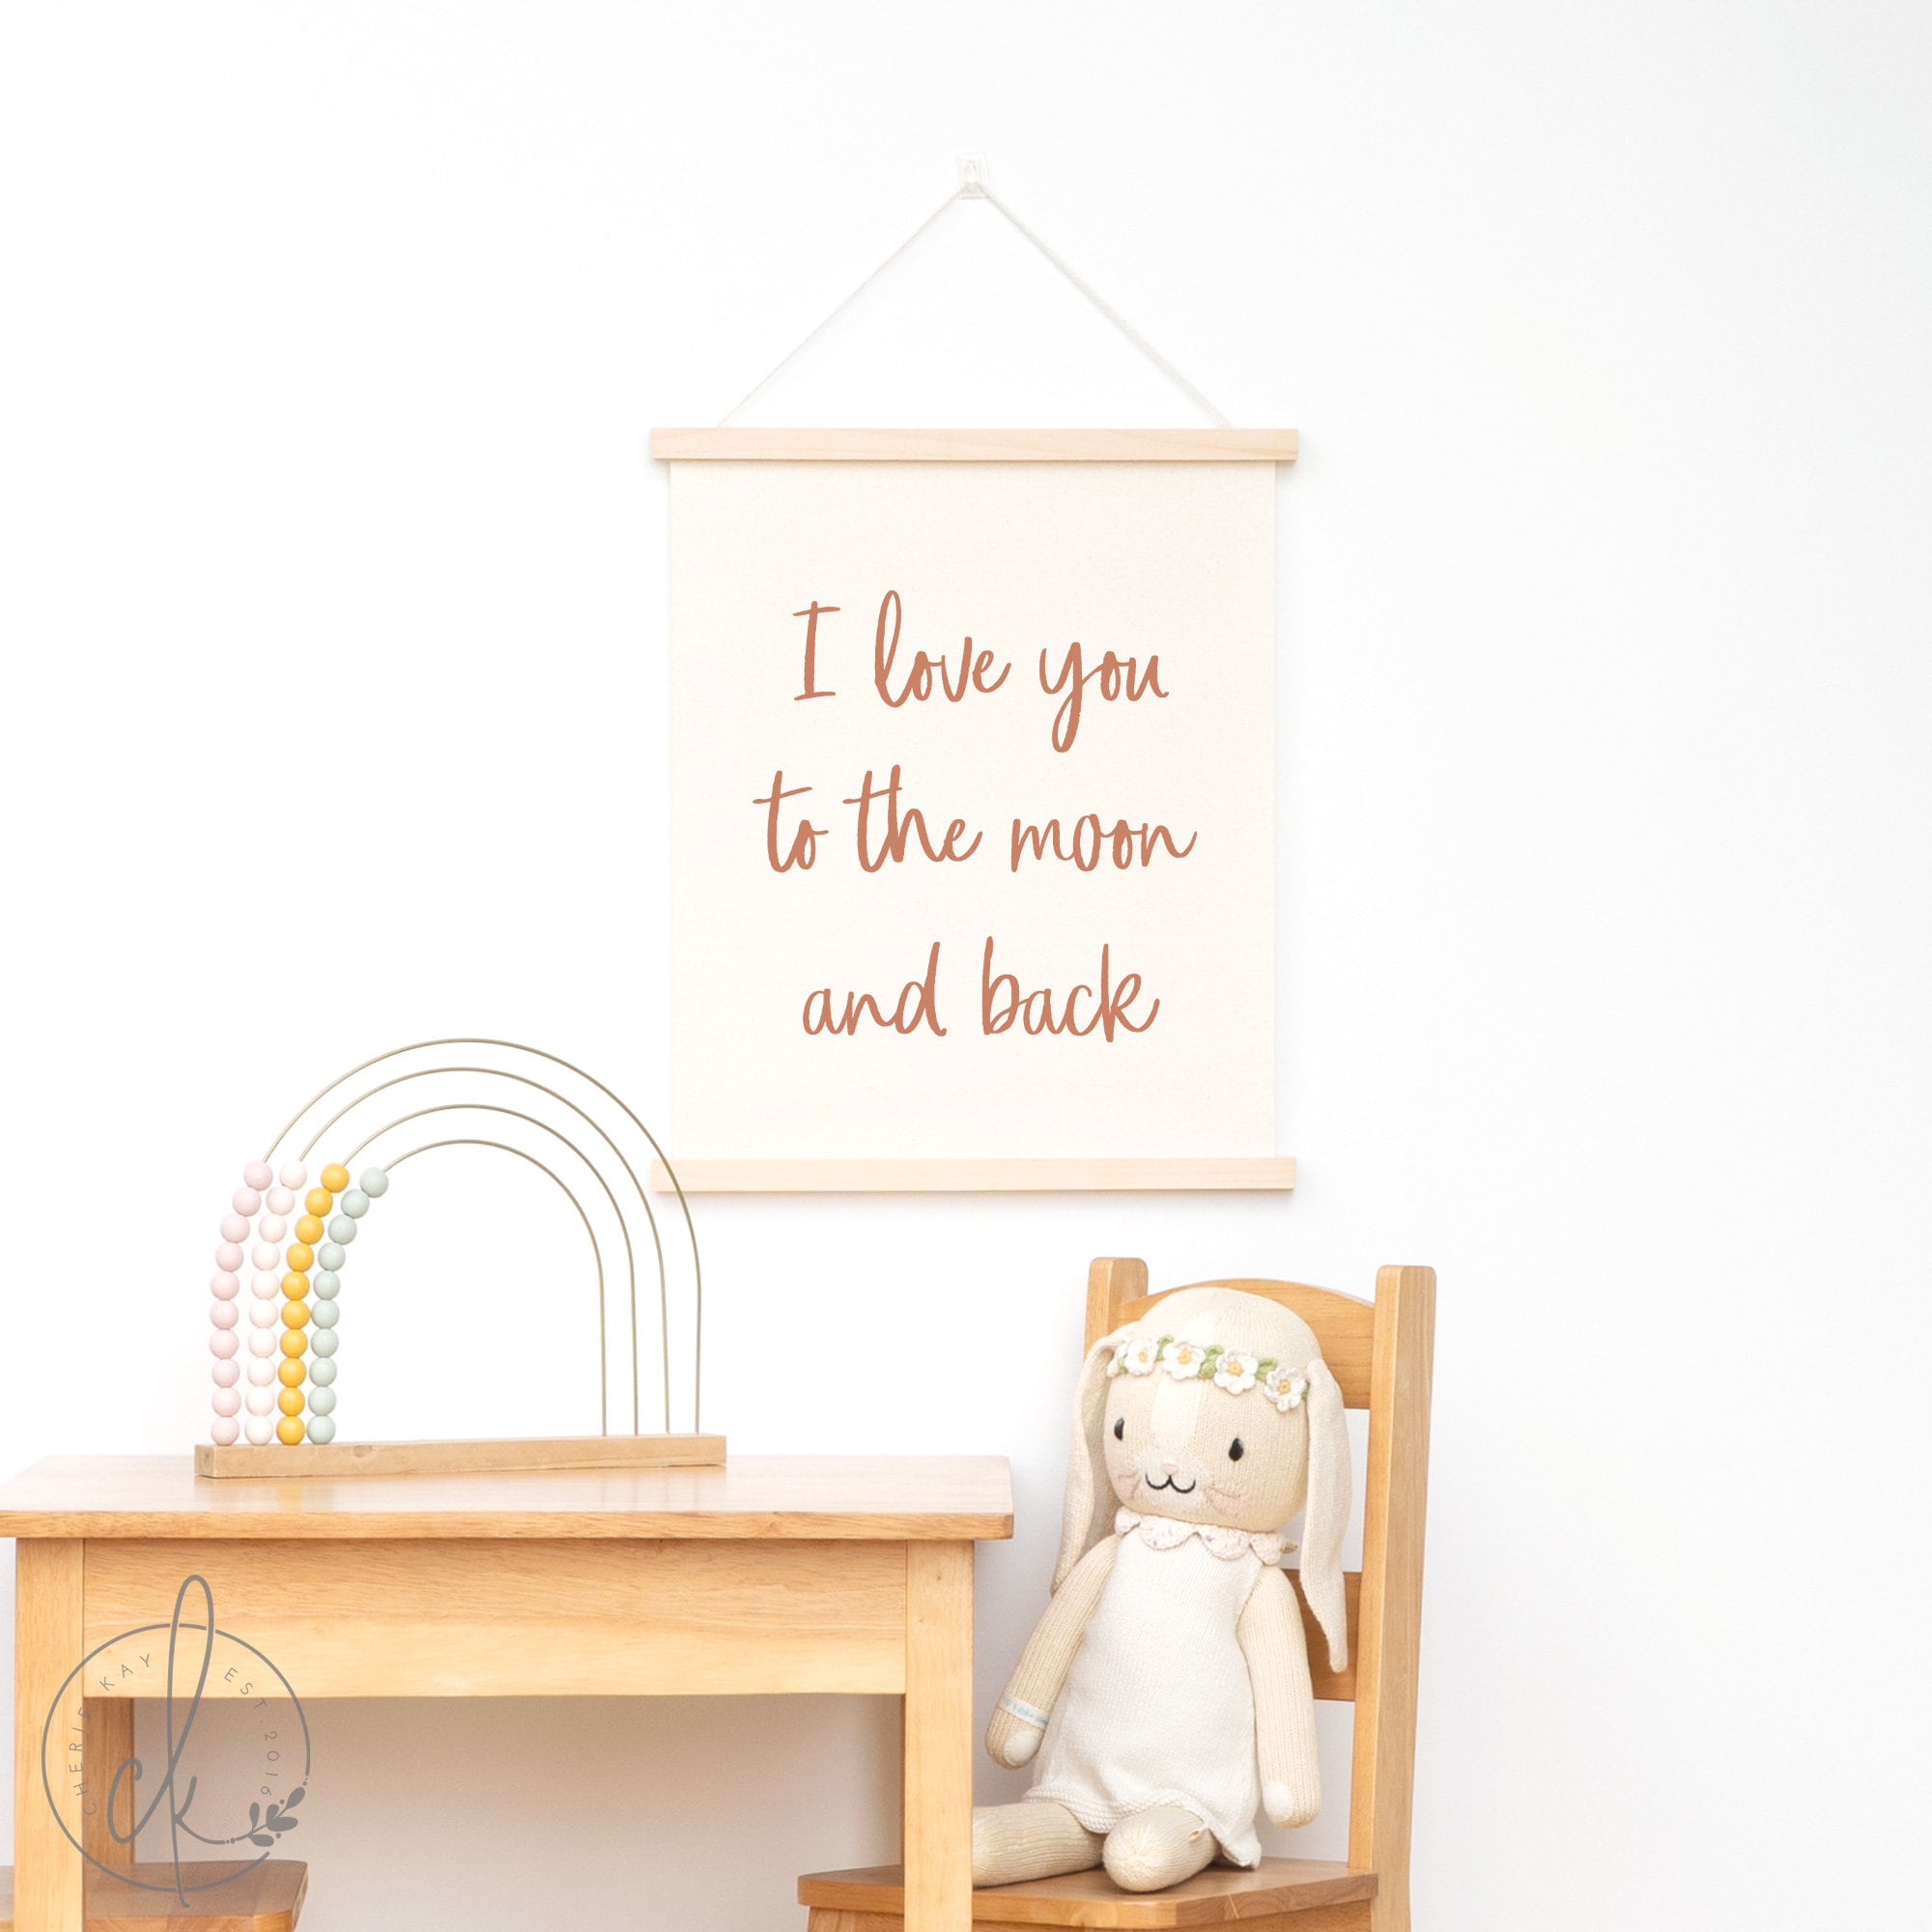 I Love You To The Moon And Back | Canvas Wall Hanging | Nursery Wall Decor | Kids Room Decor | New Baby Gift